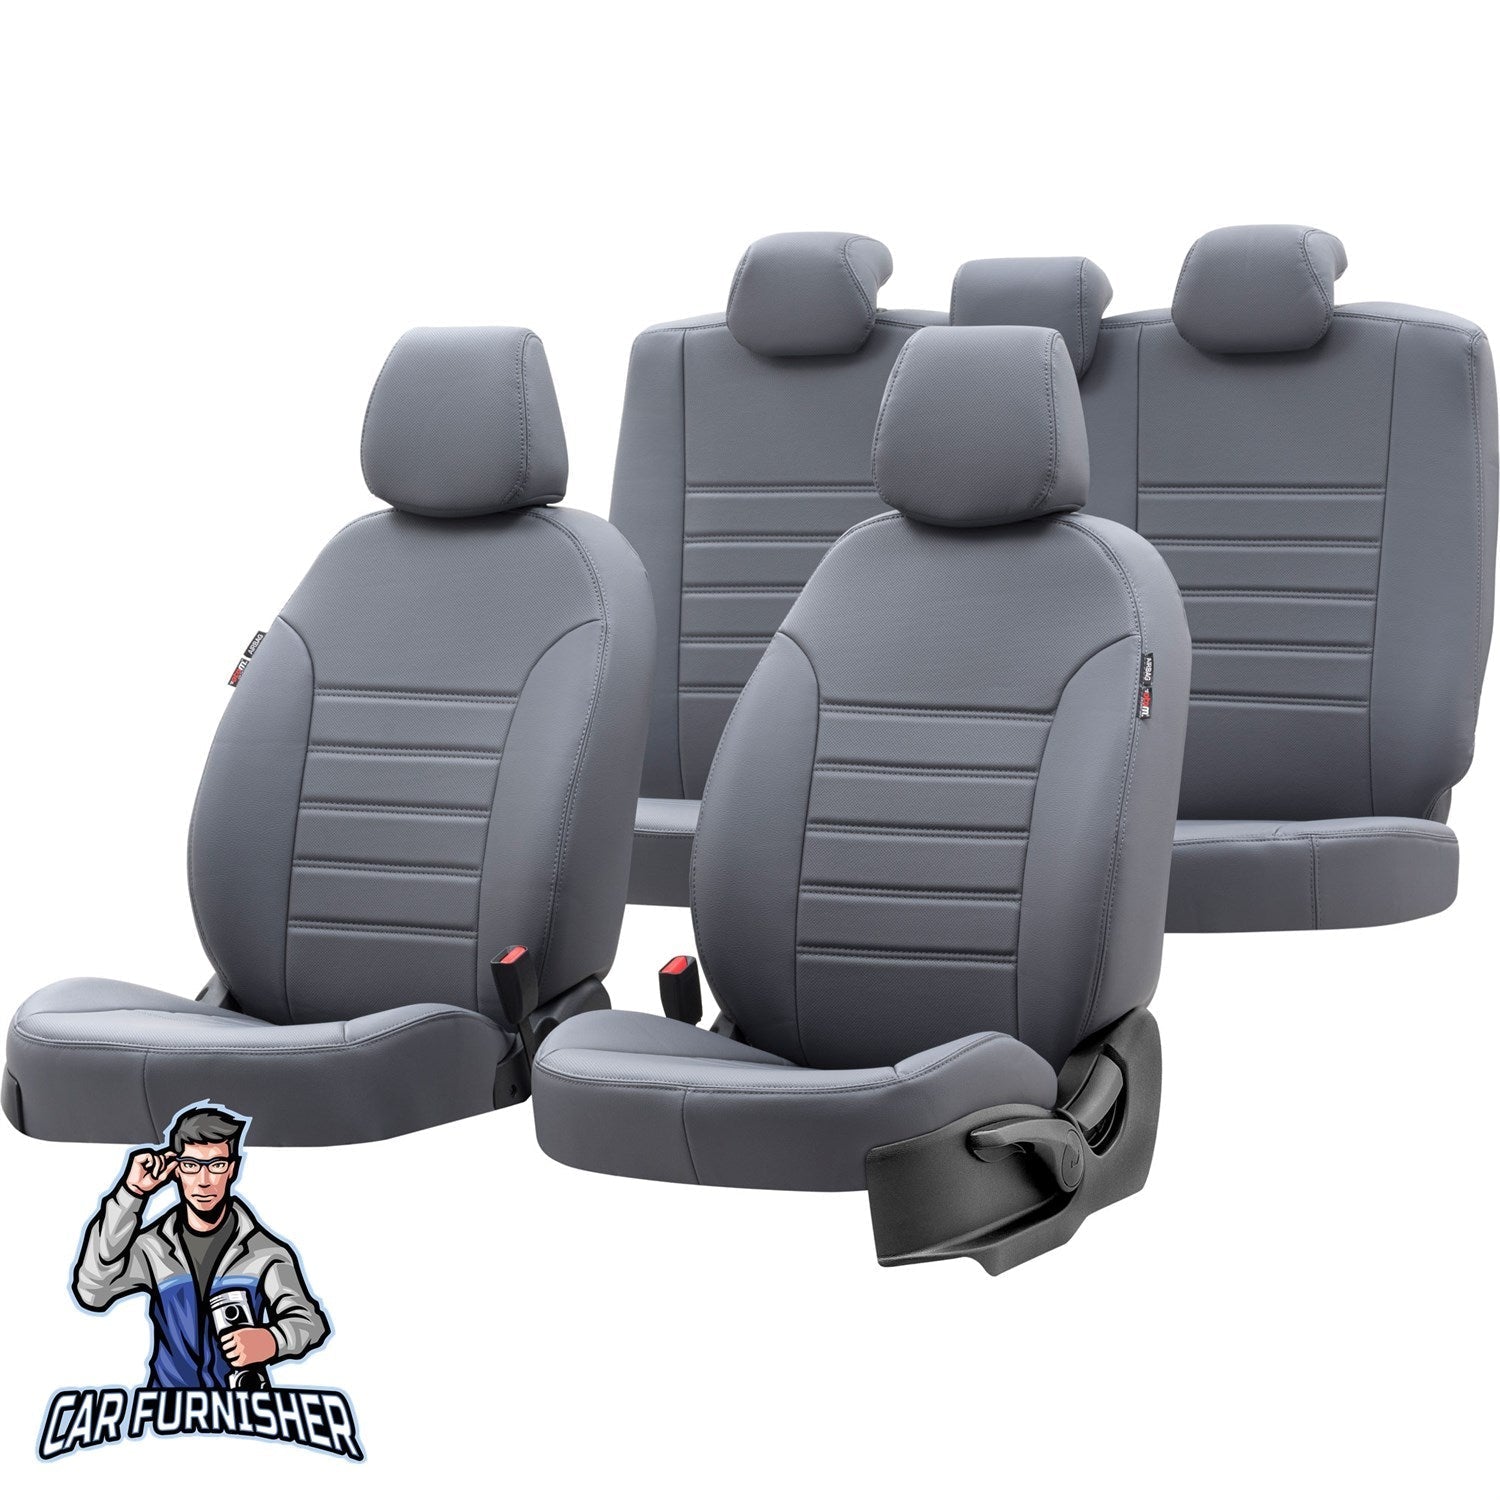 Seat Alhambra Seat Covers Istanbul Leather Design Smoked Leather